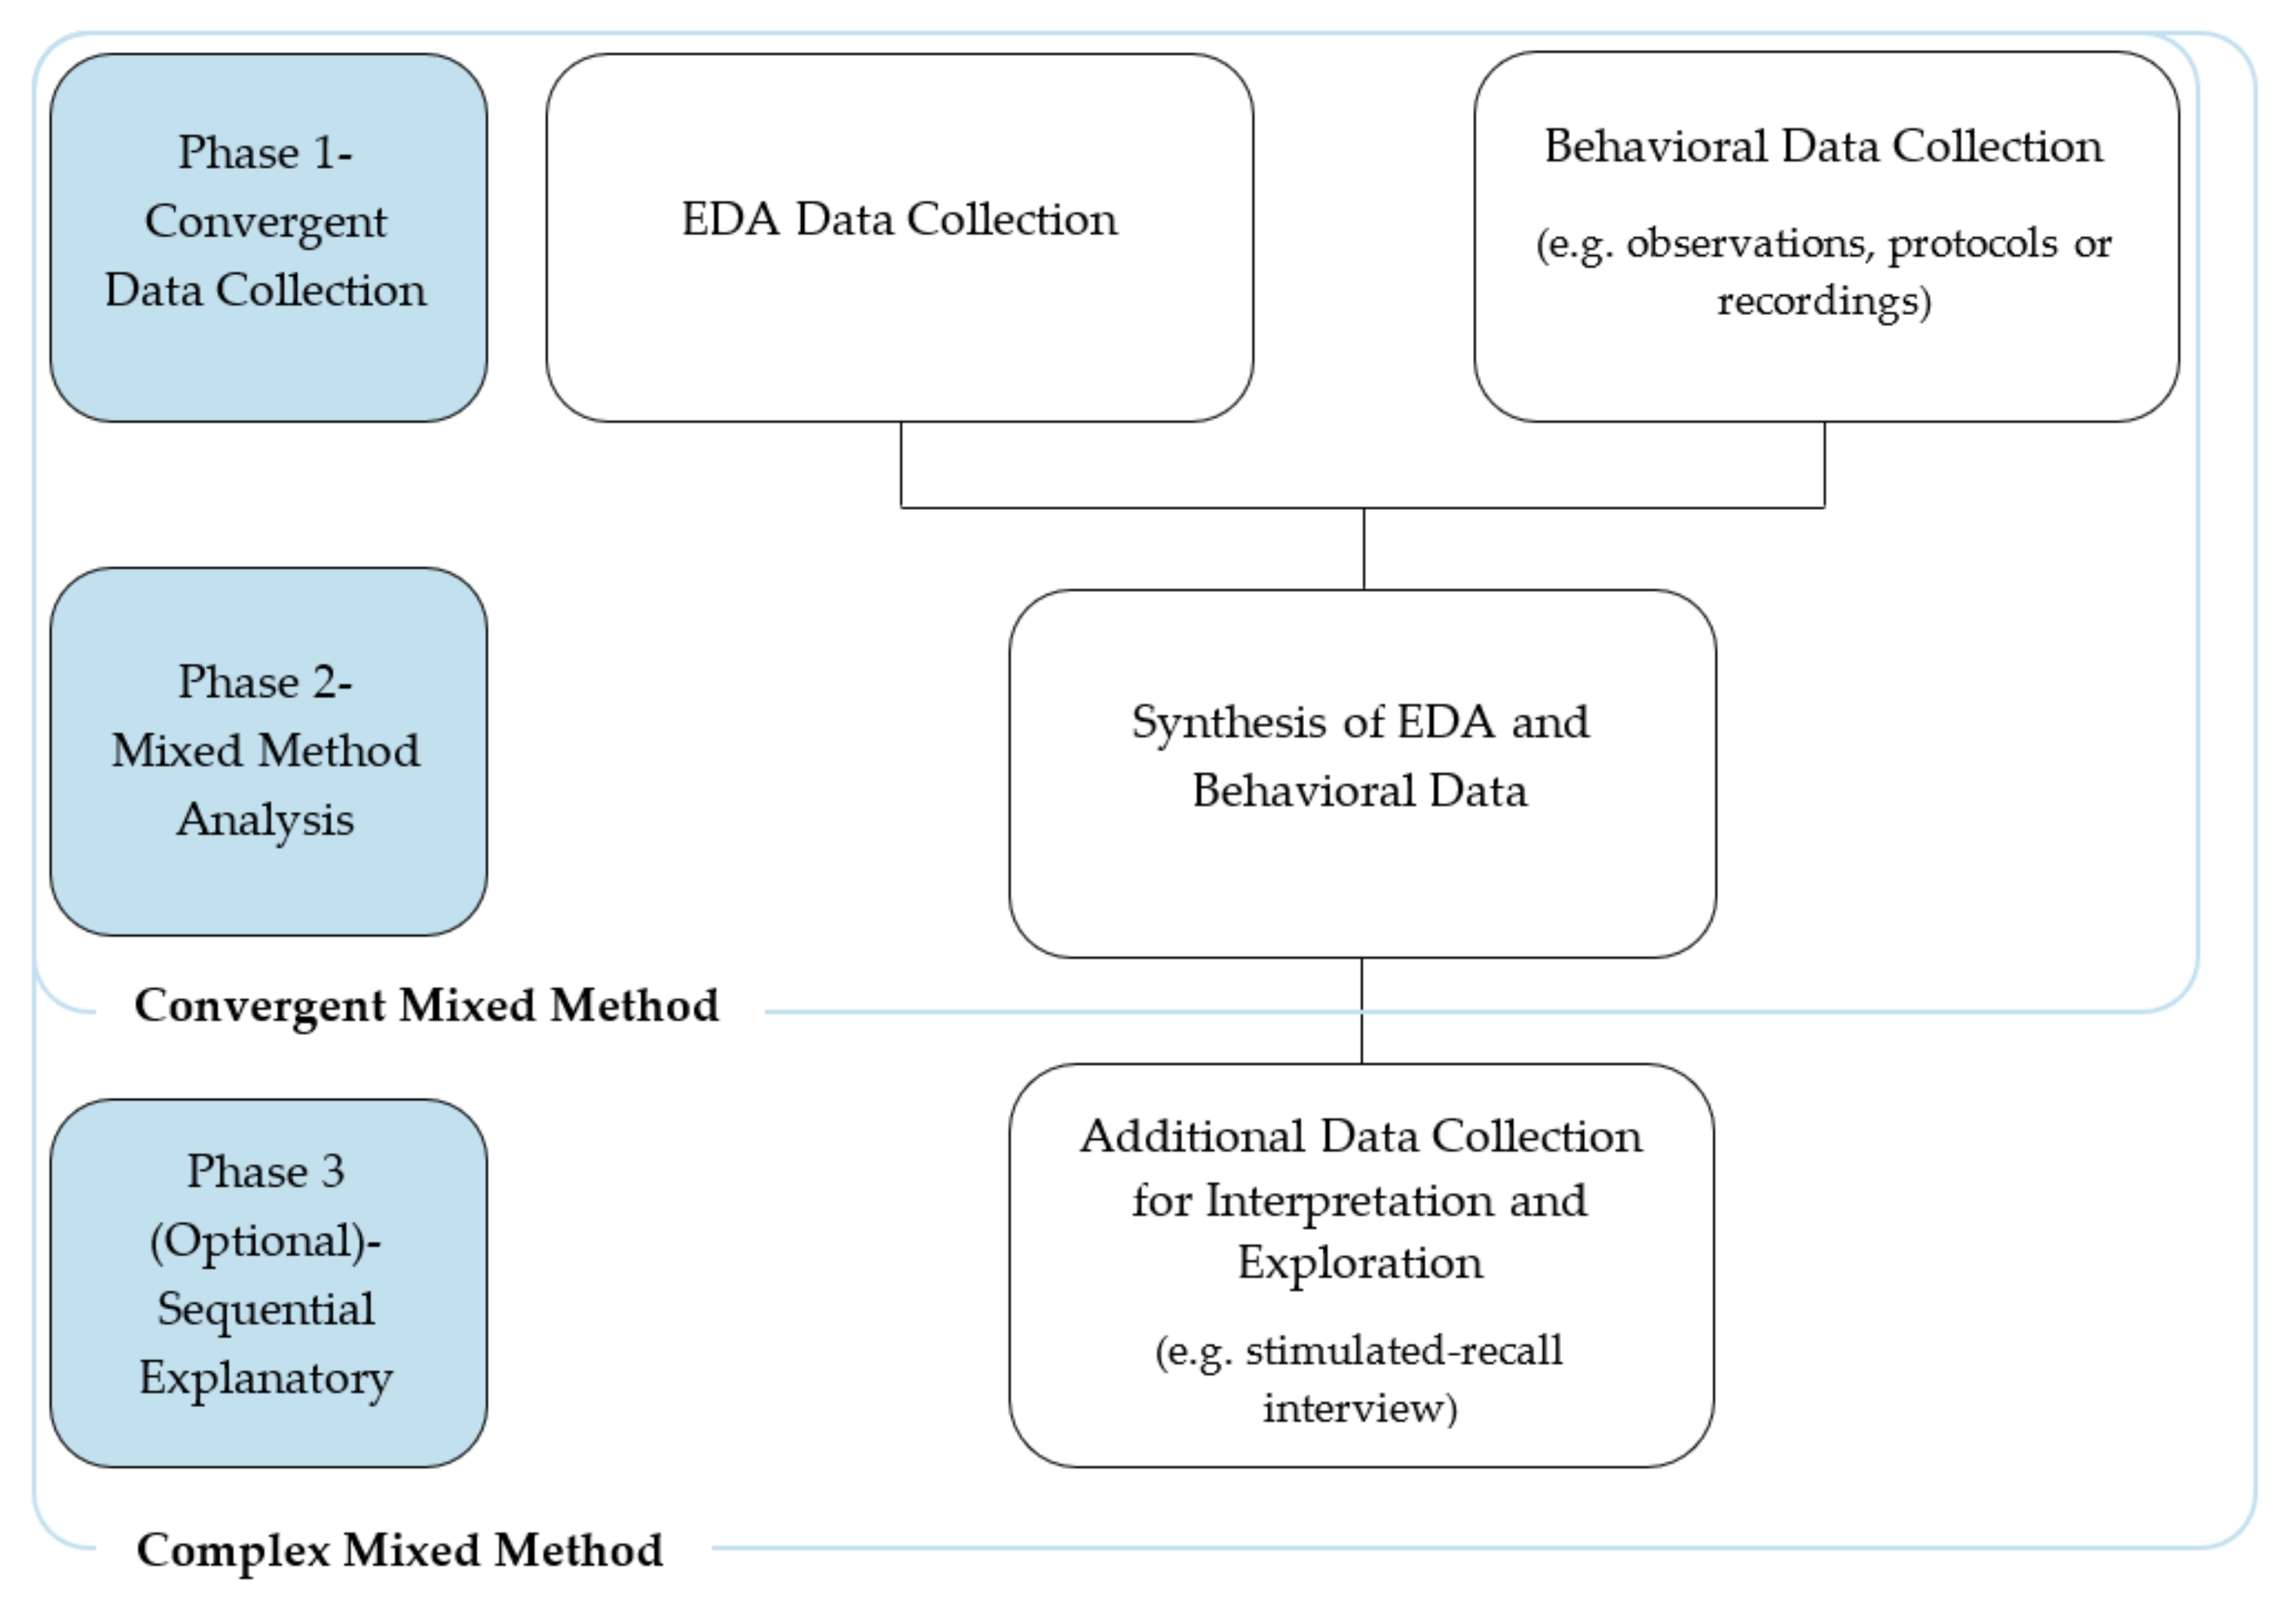 Sensors Free Full-Text | A Novel Mixed Methods Approach to Synthesize EDA Data with Behavioral Data to Gain Educational Insight